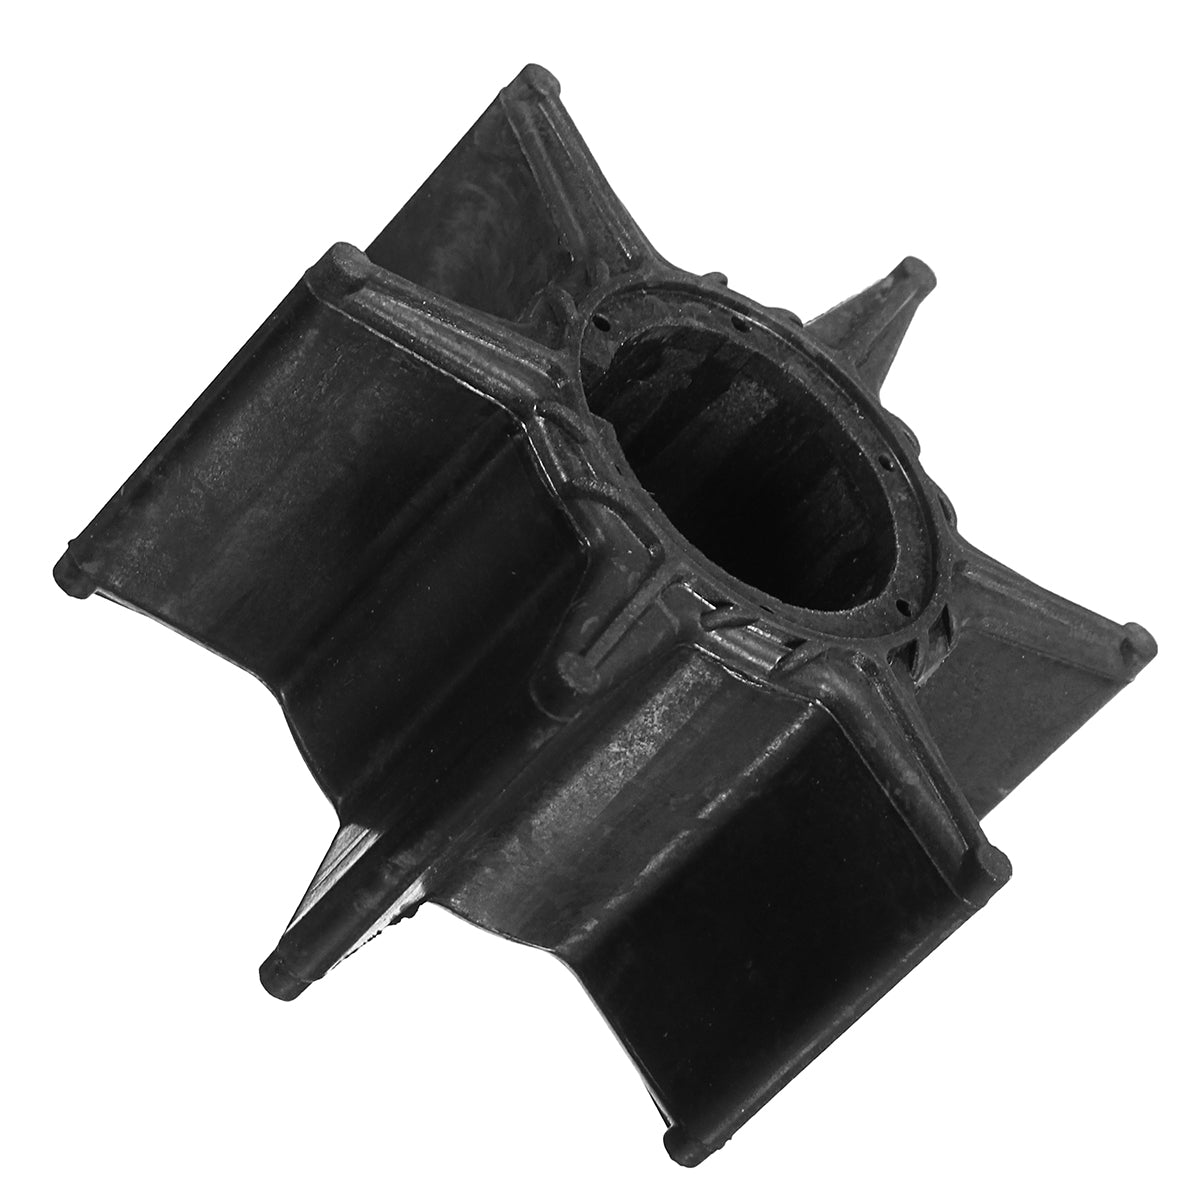 Black Water Pump Impeller For Yamaha 70HP 75HP 85HP 90HP Outboard 688-44352-03 18-3070